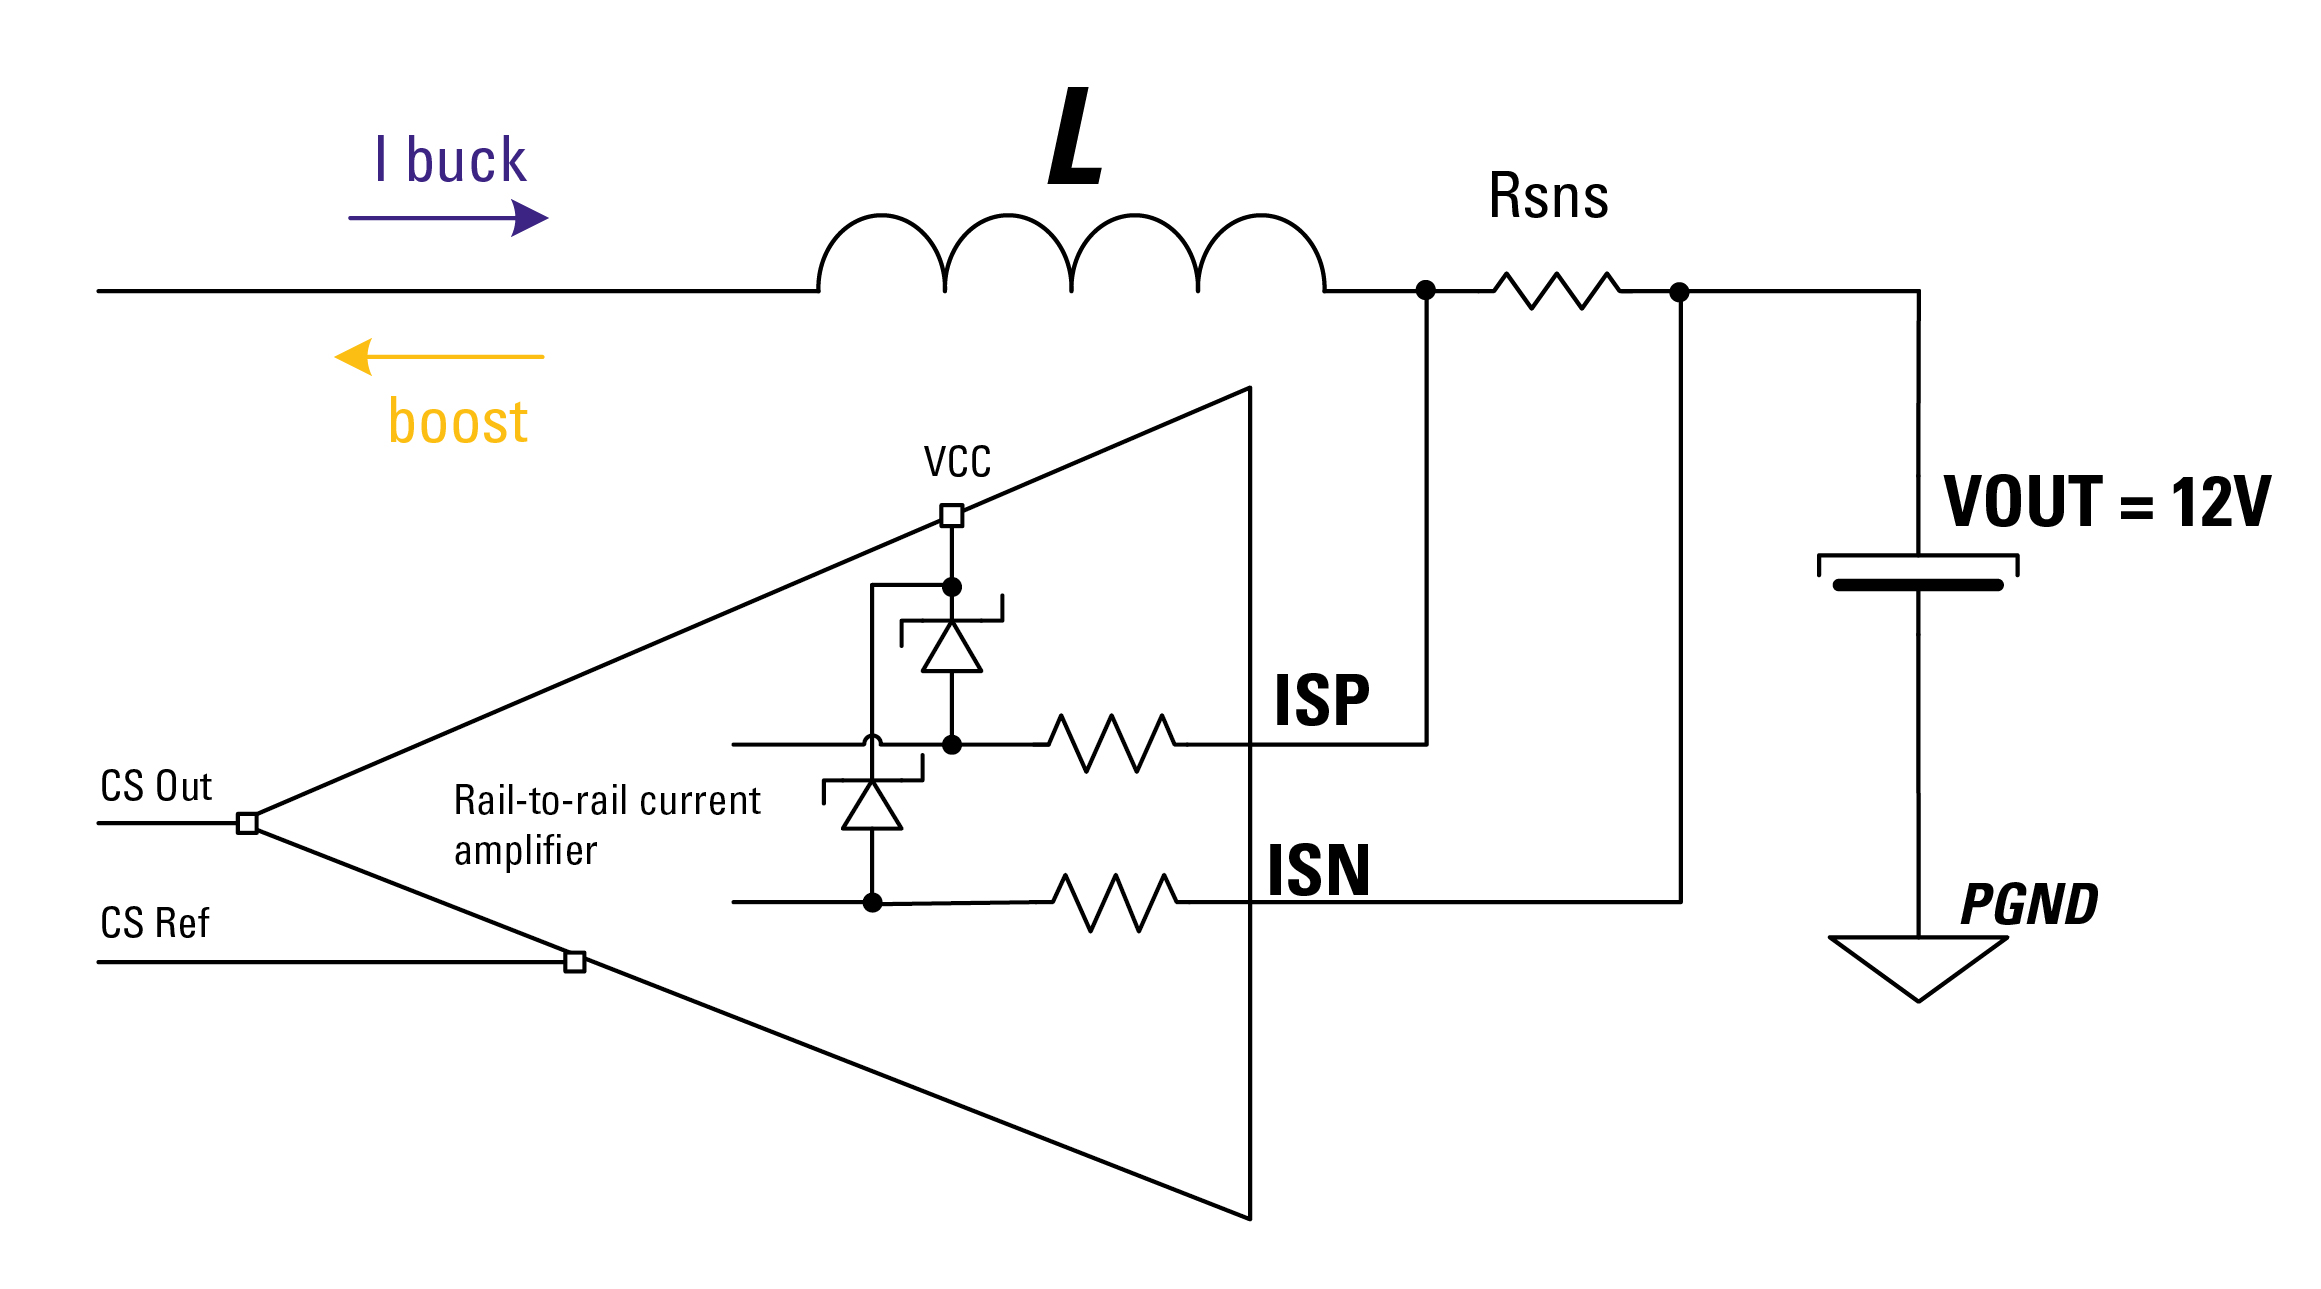 Figure 4 - Current sense amplifier protections and requirements